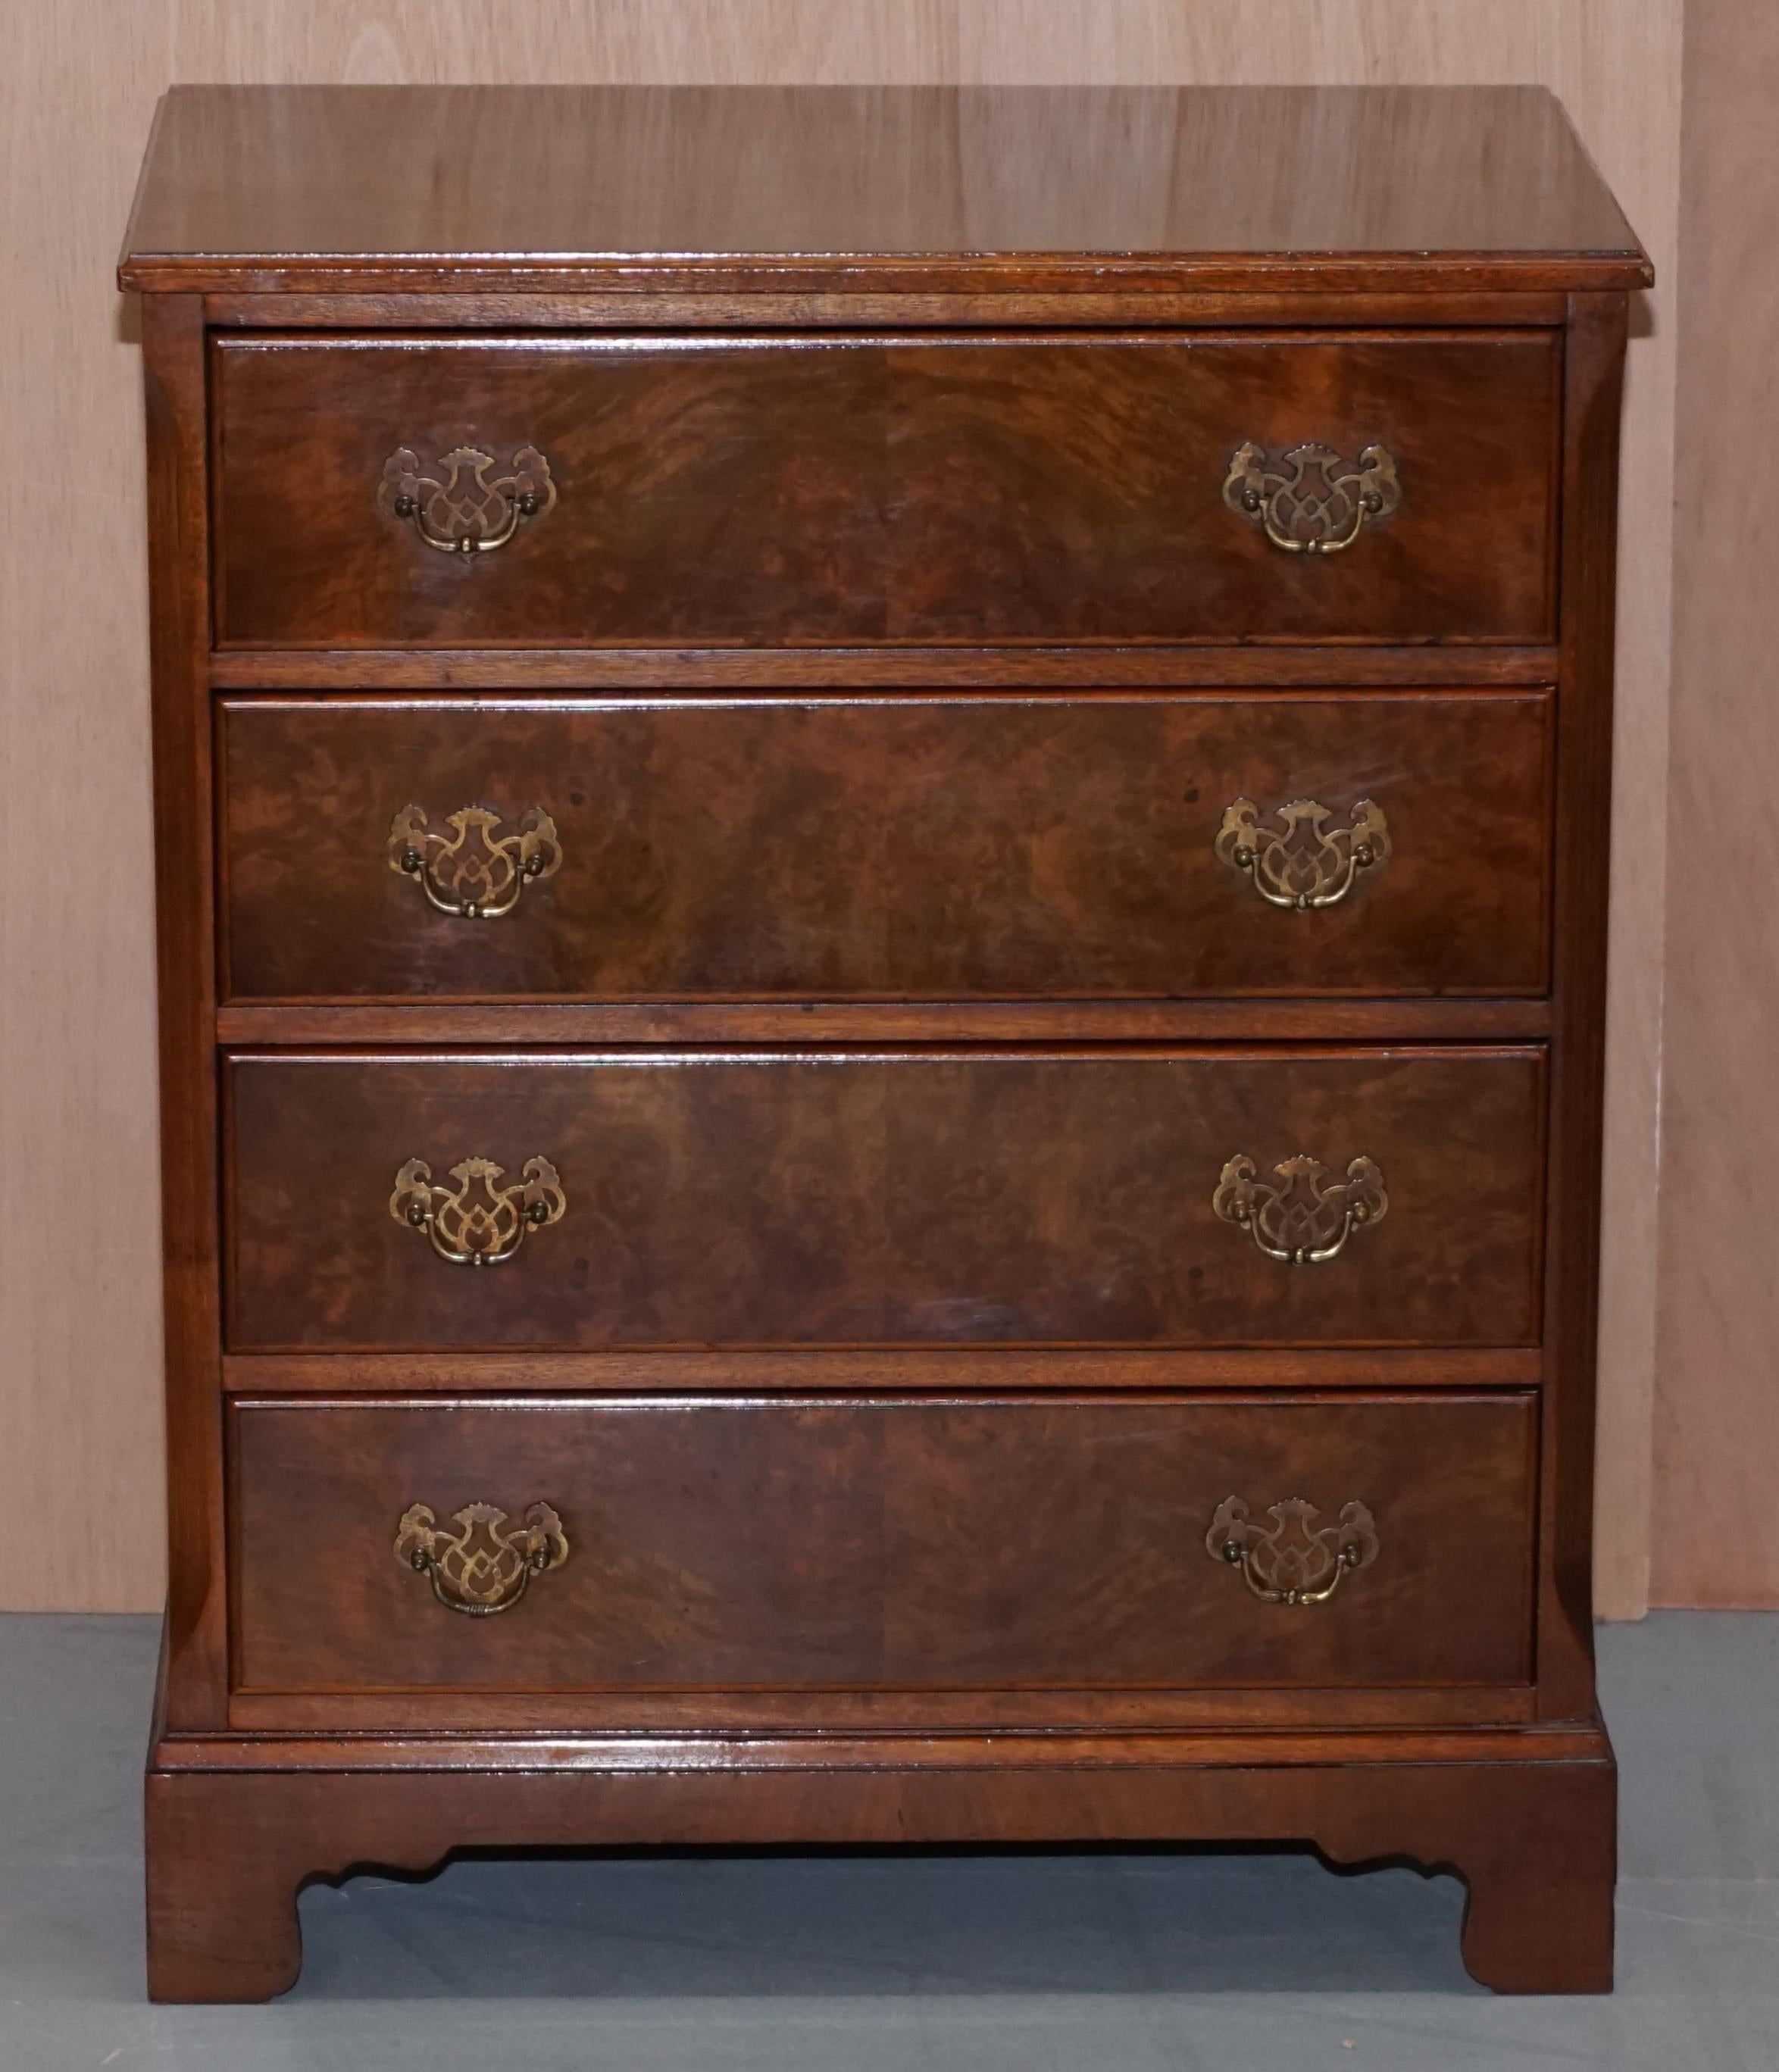 We are delighted to offer for sale this lovely sized Walnut chest of drawers circa 1930-1950 in the Georgian style

A very high decorative and utilitarian chest of drawers, ideally suited as a lamp or side table

We have cleaned waxed and